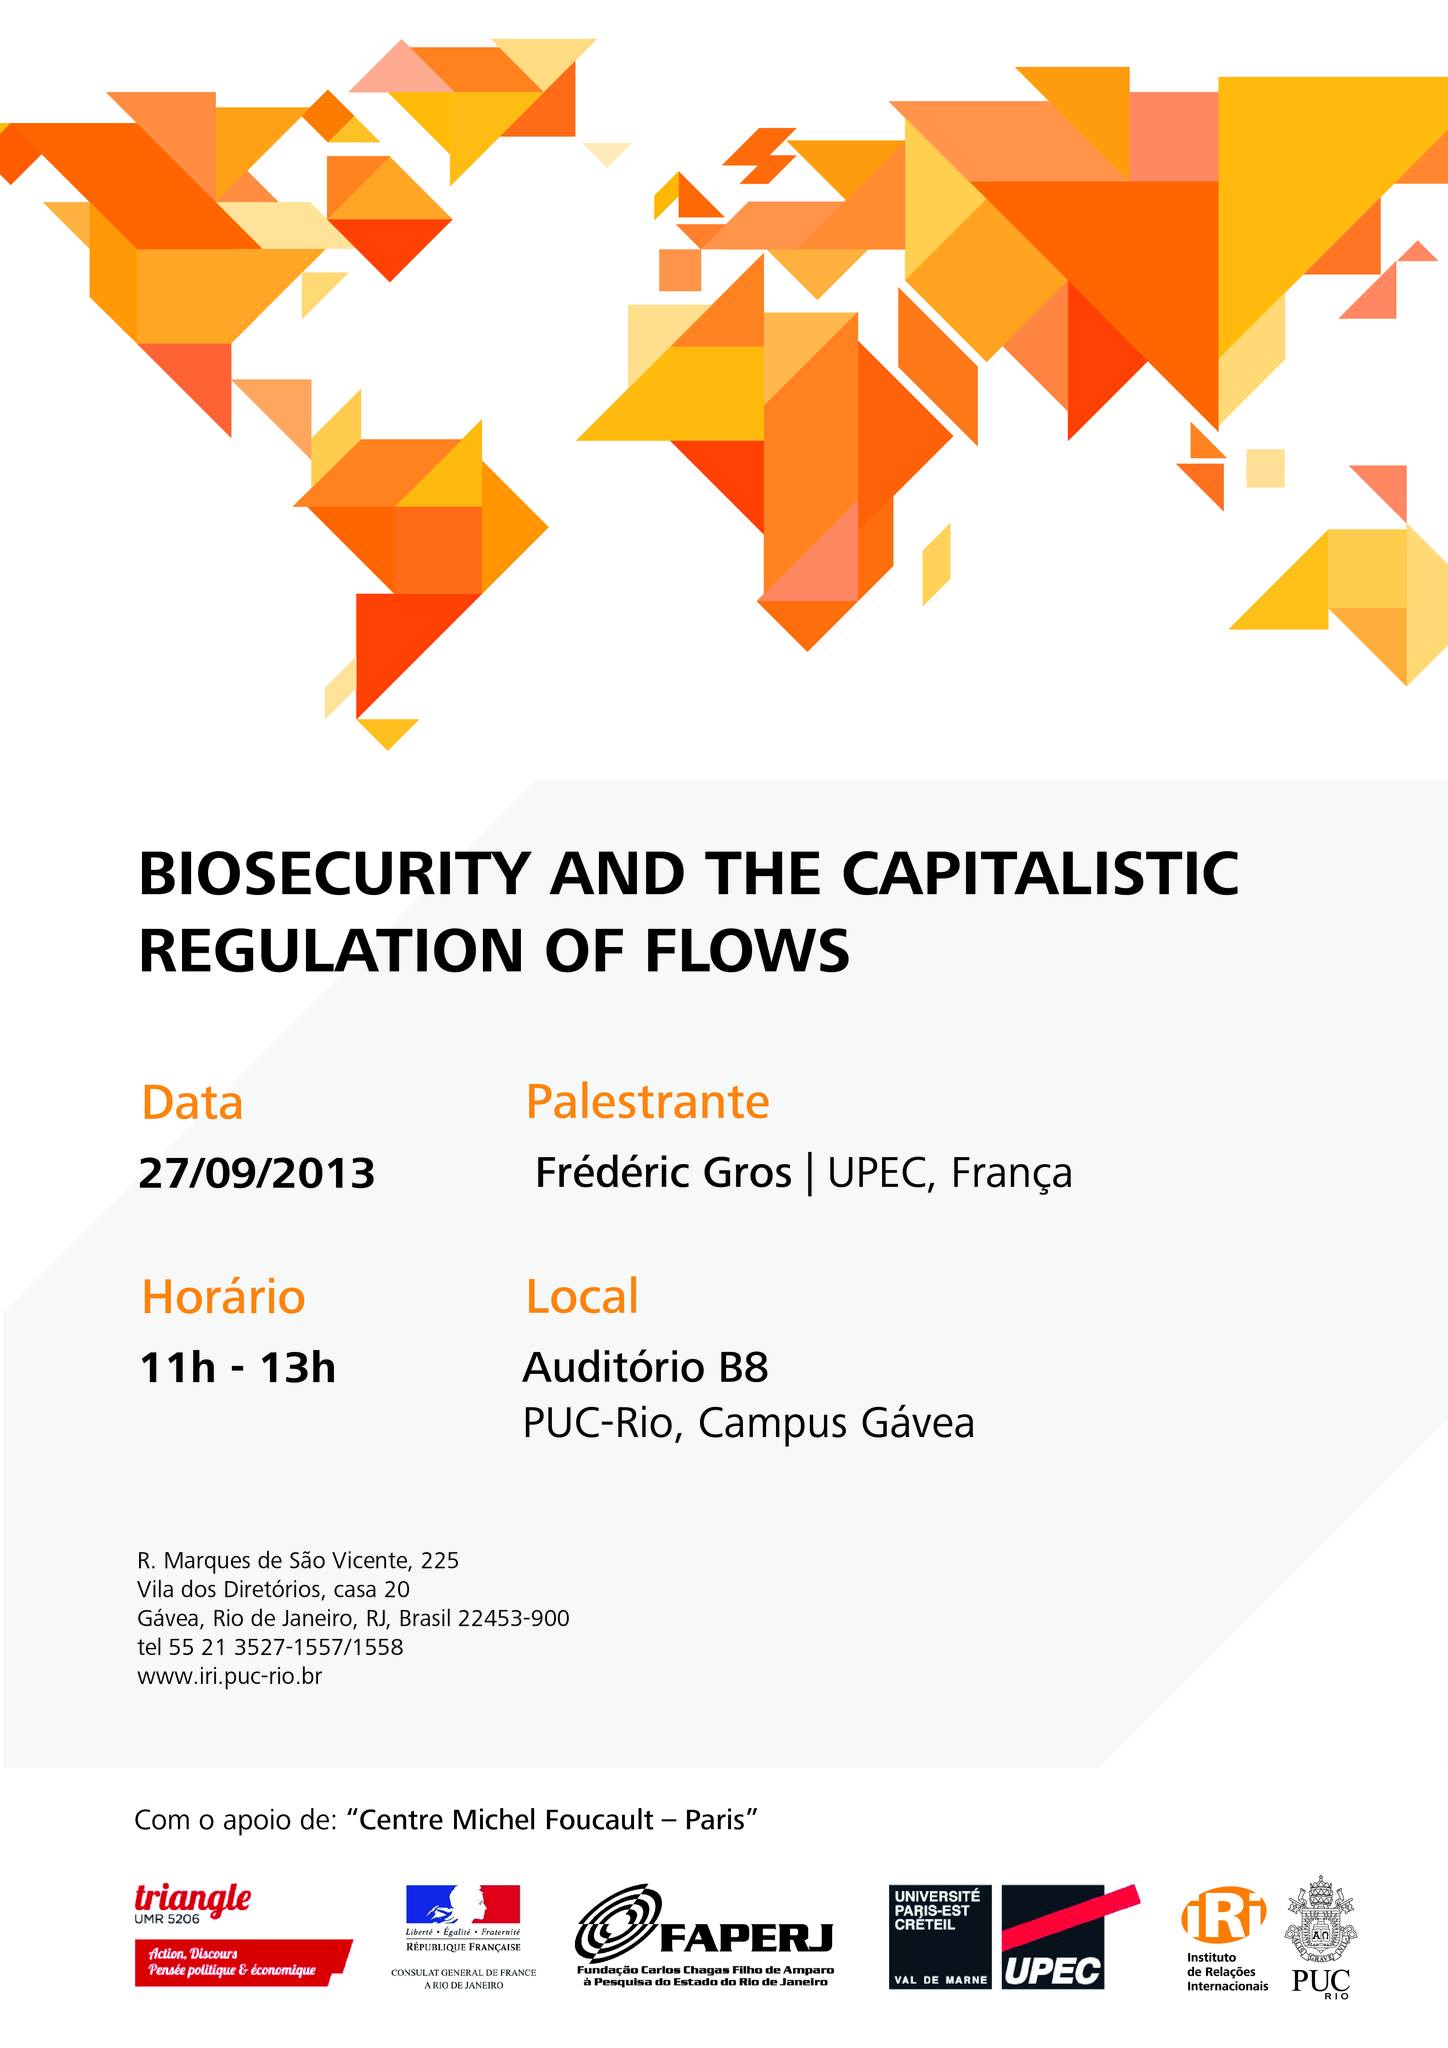 Biosecurtity and the Capitalistic Regulation of Flows